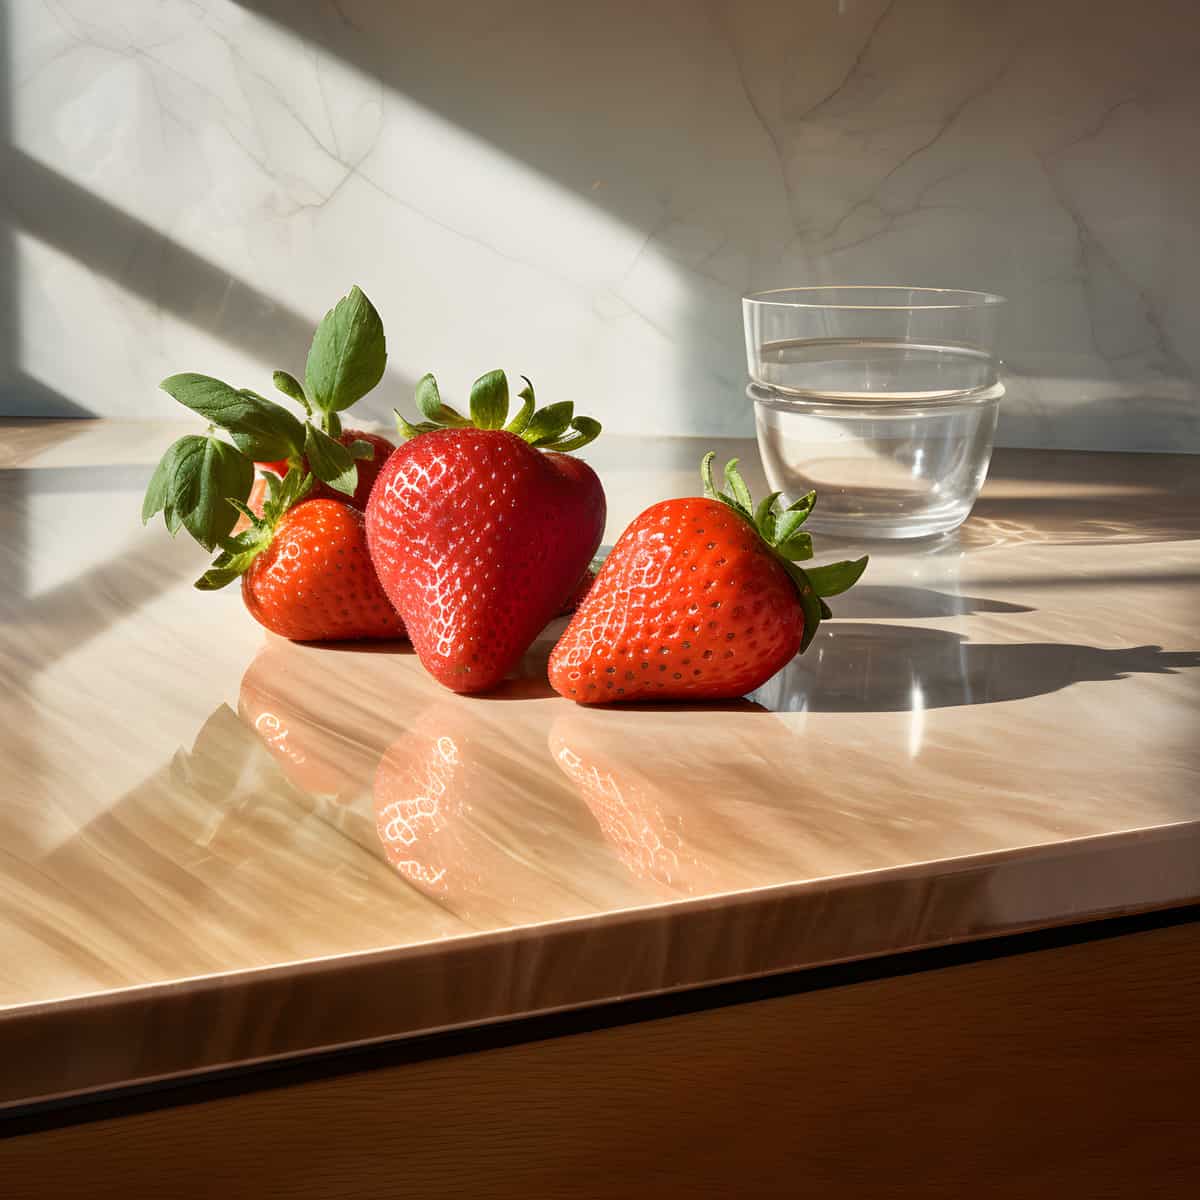 Strawberry Tree Fruit on a kitchen counter